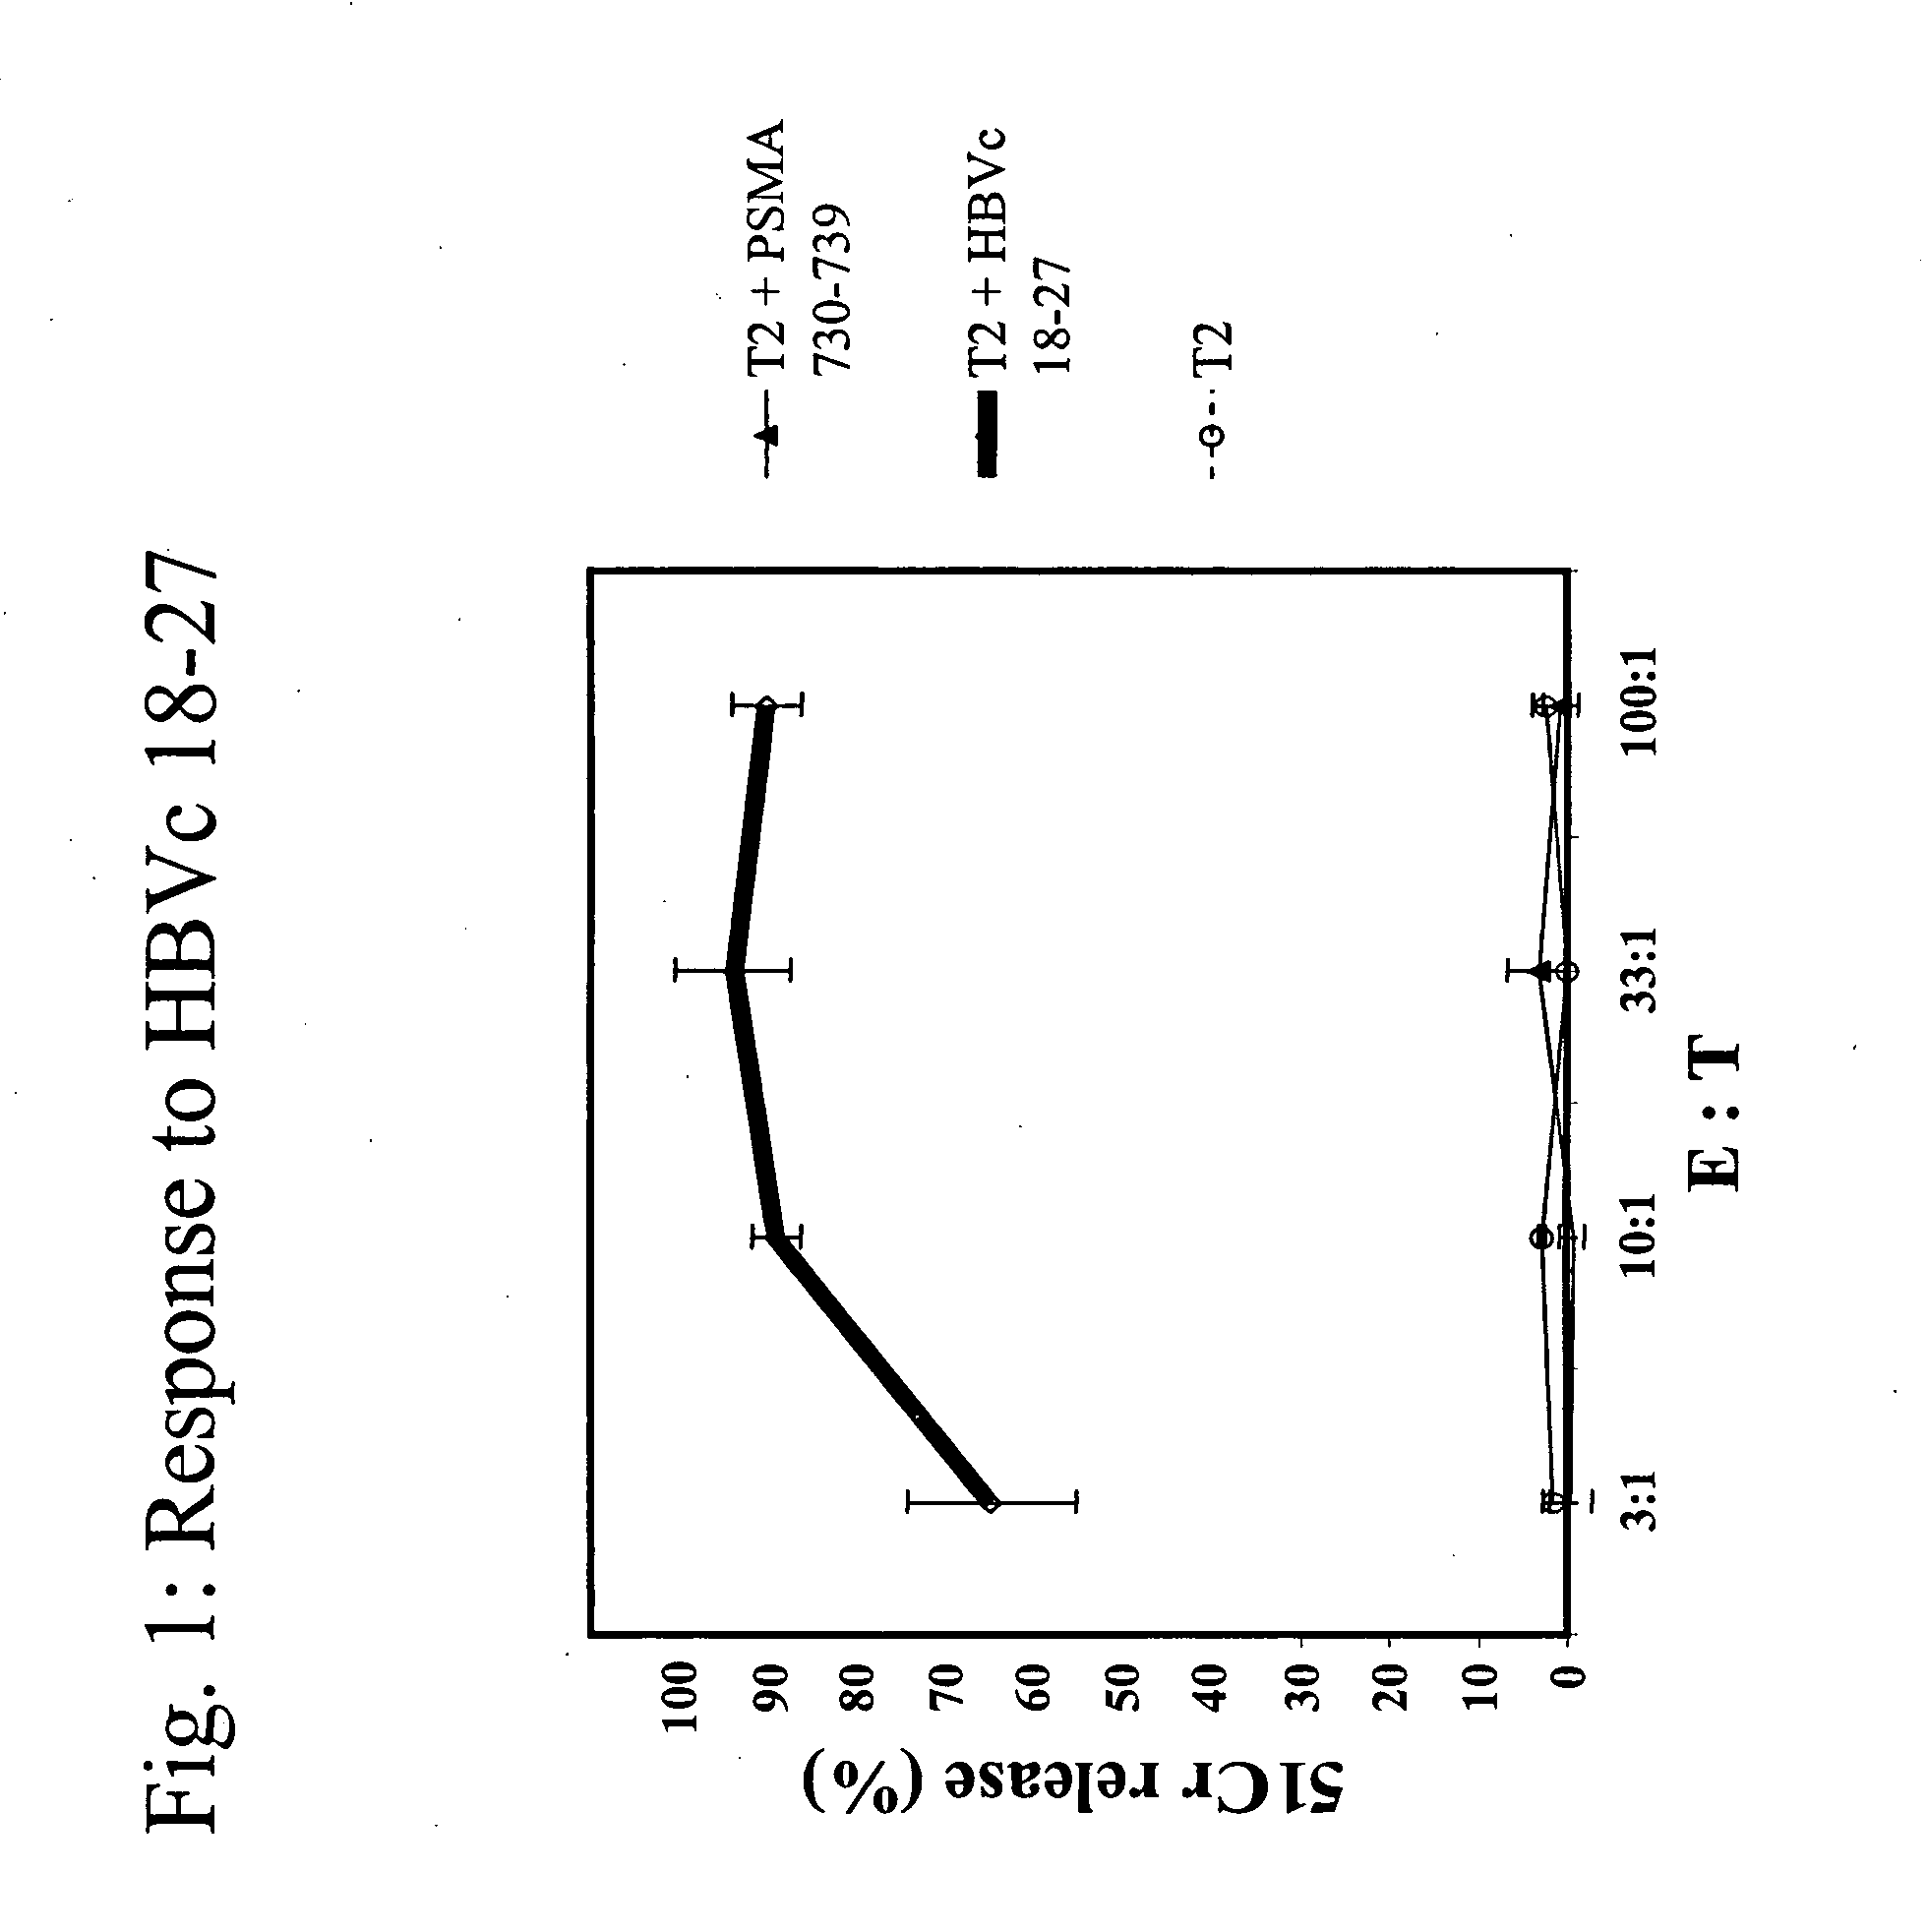 Methods to bypass CD4+